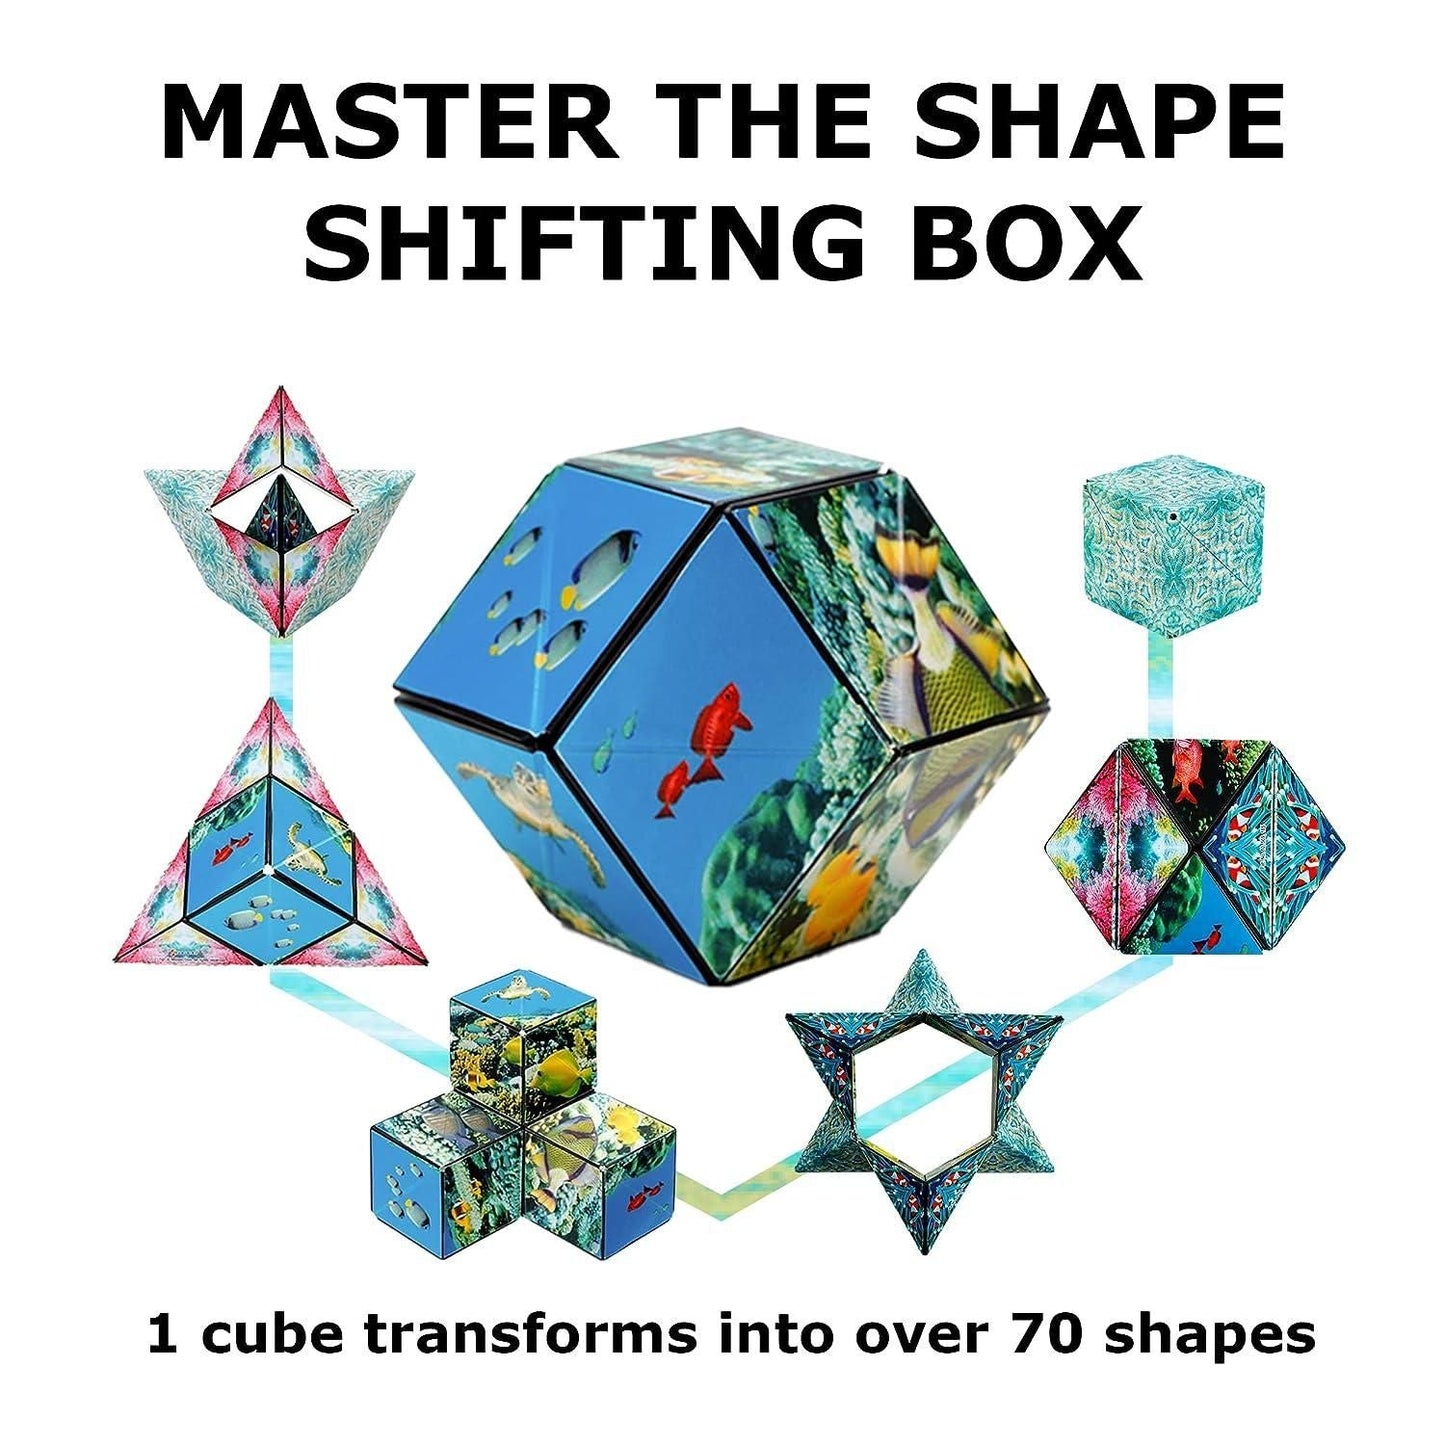 Shape Shifting Box Award-Winning, Patented Fidget Cube w/ 36 Rare Earth Magnets - Premium  from Roposo Clout - Just $700! Shop now at Mystical9